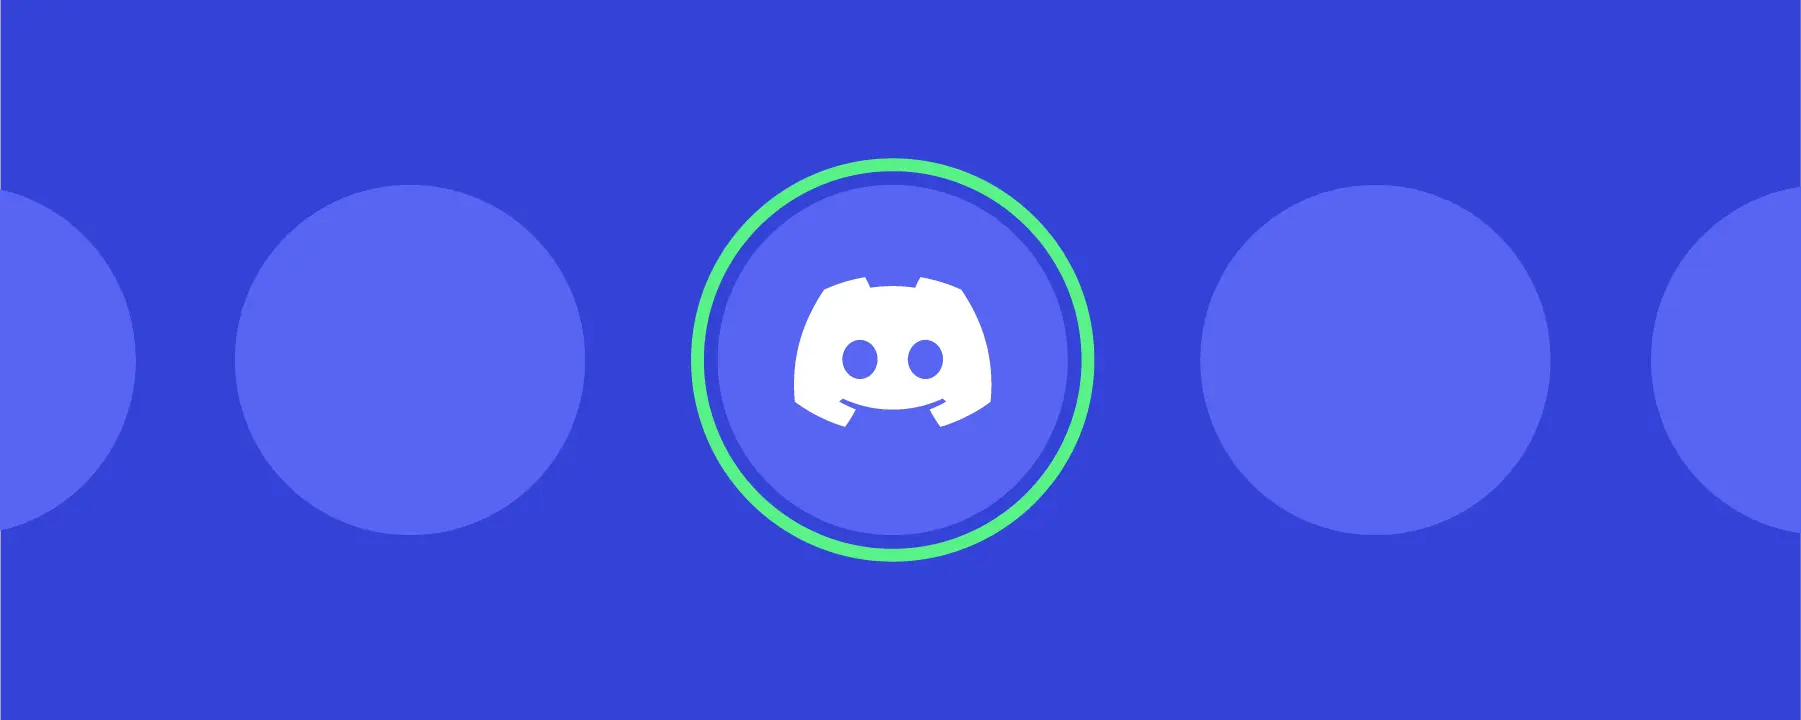 Discord has acquired Gas, a compliments-based social media platform targeting teenagers.